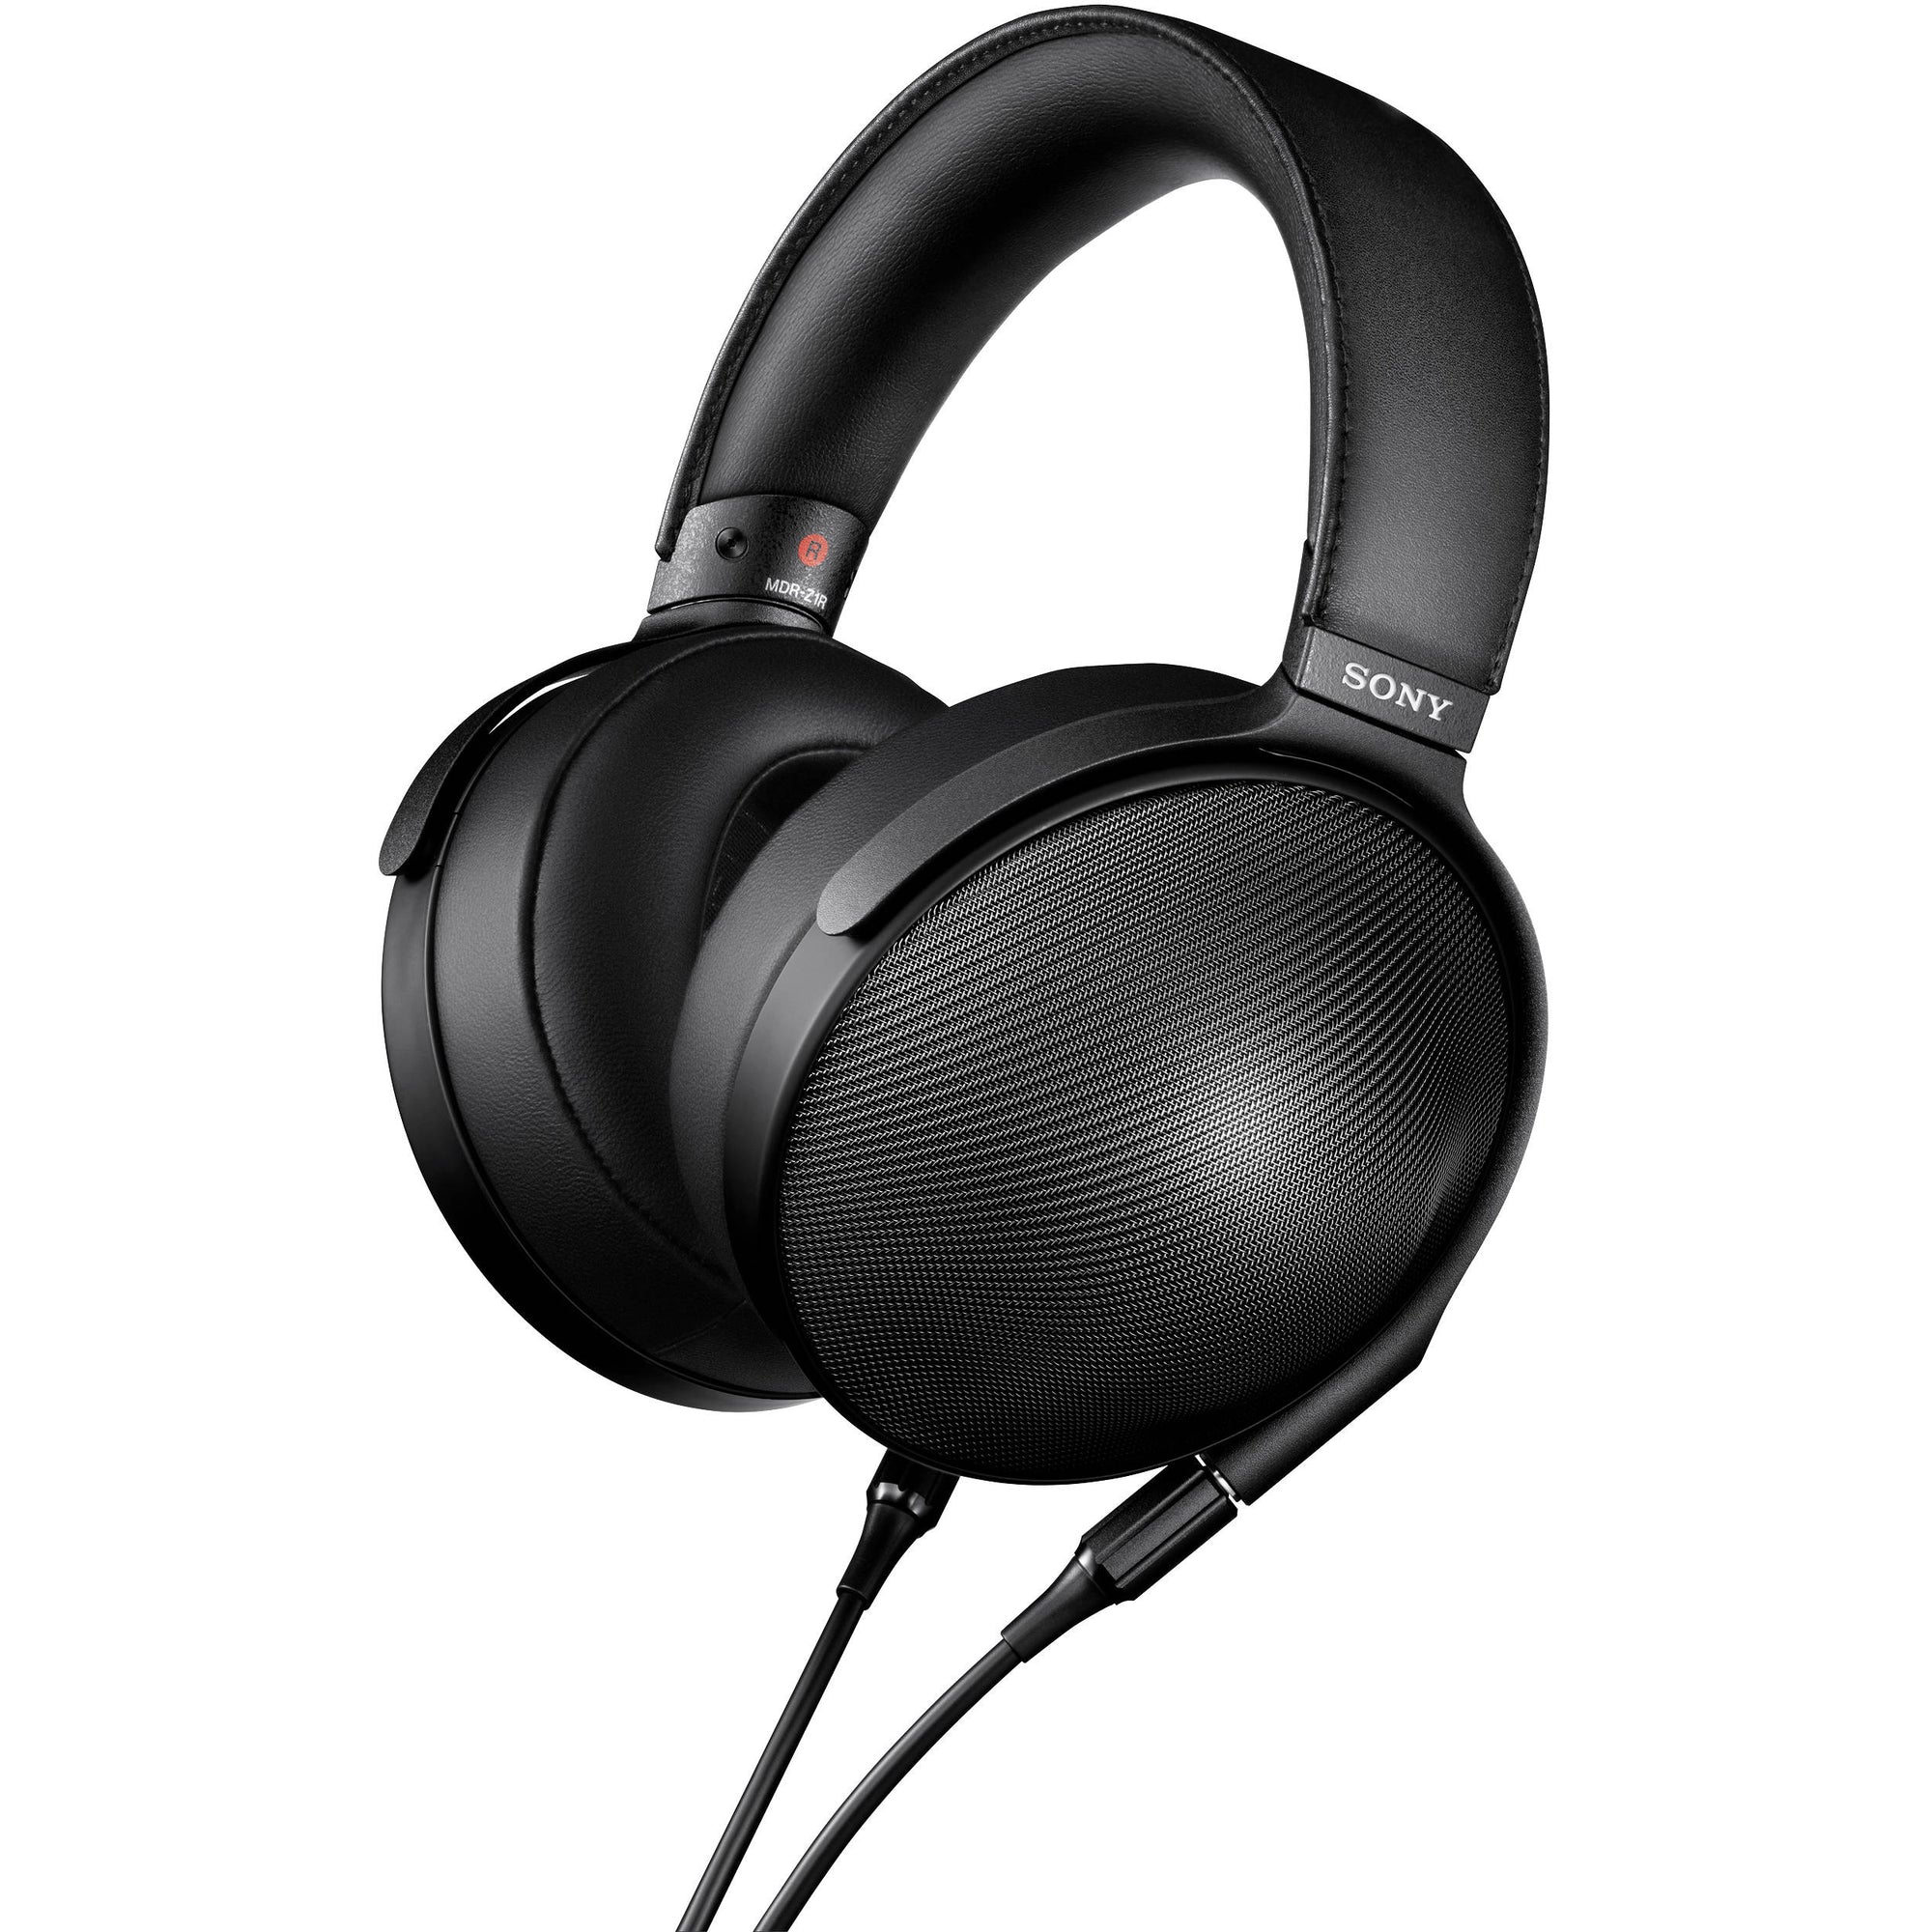 SONY HEADPHONES | SONY PRODUCTS Tagged 